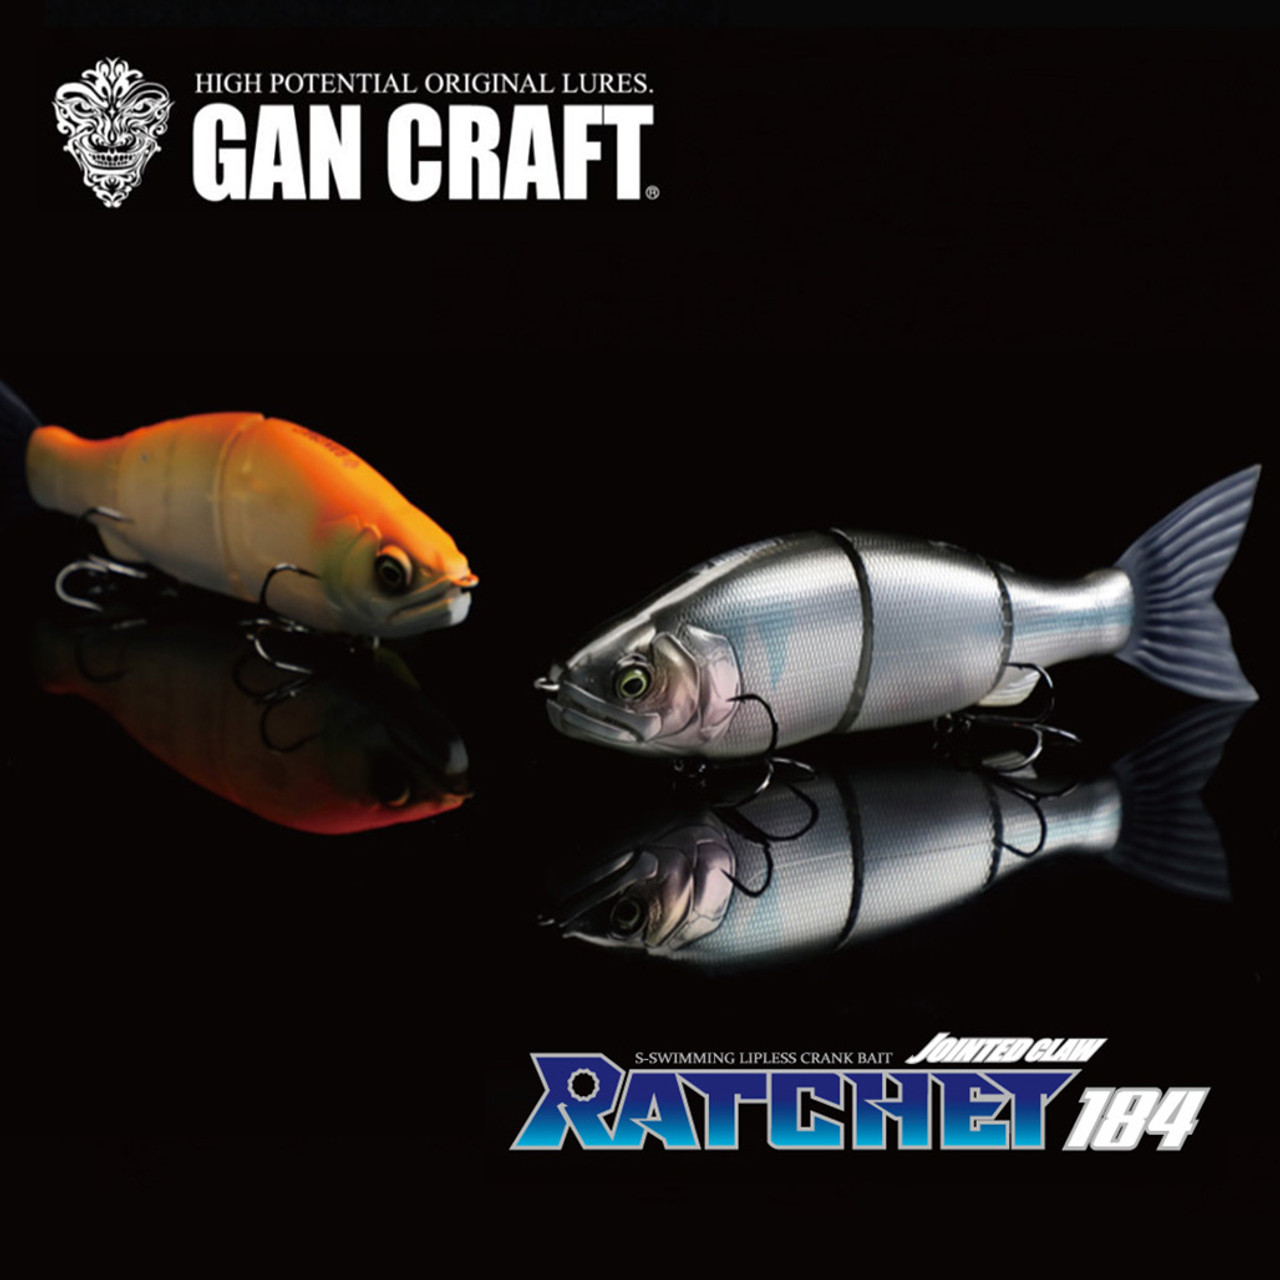 Gan Craft JOINTED CLAW RATCHET 184 F NEW - KKJAPANLURE